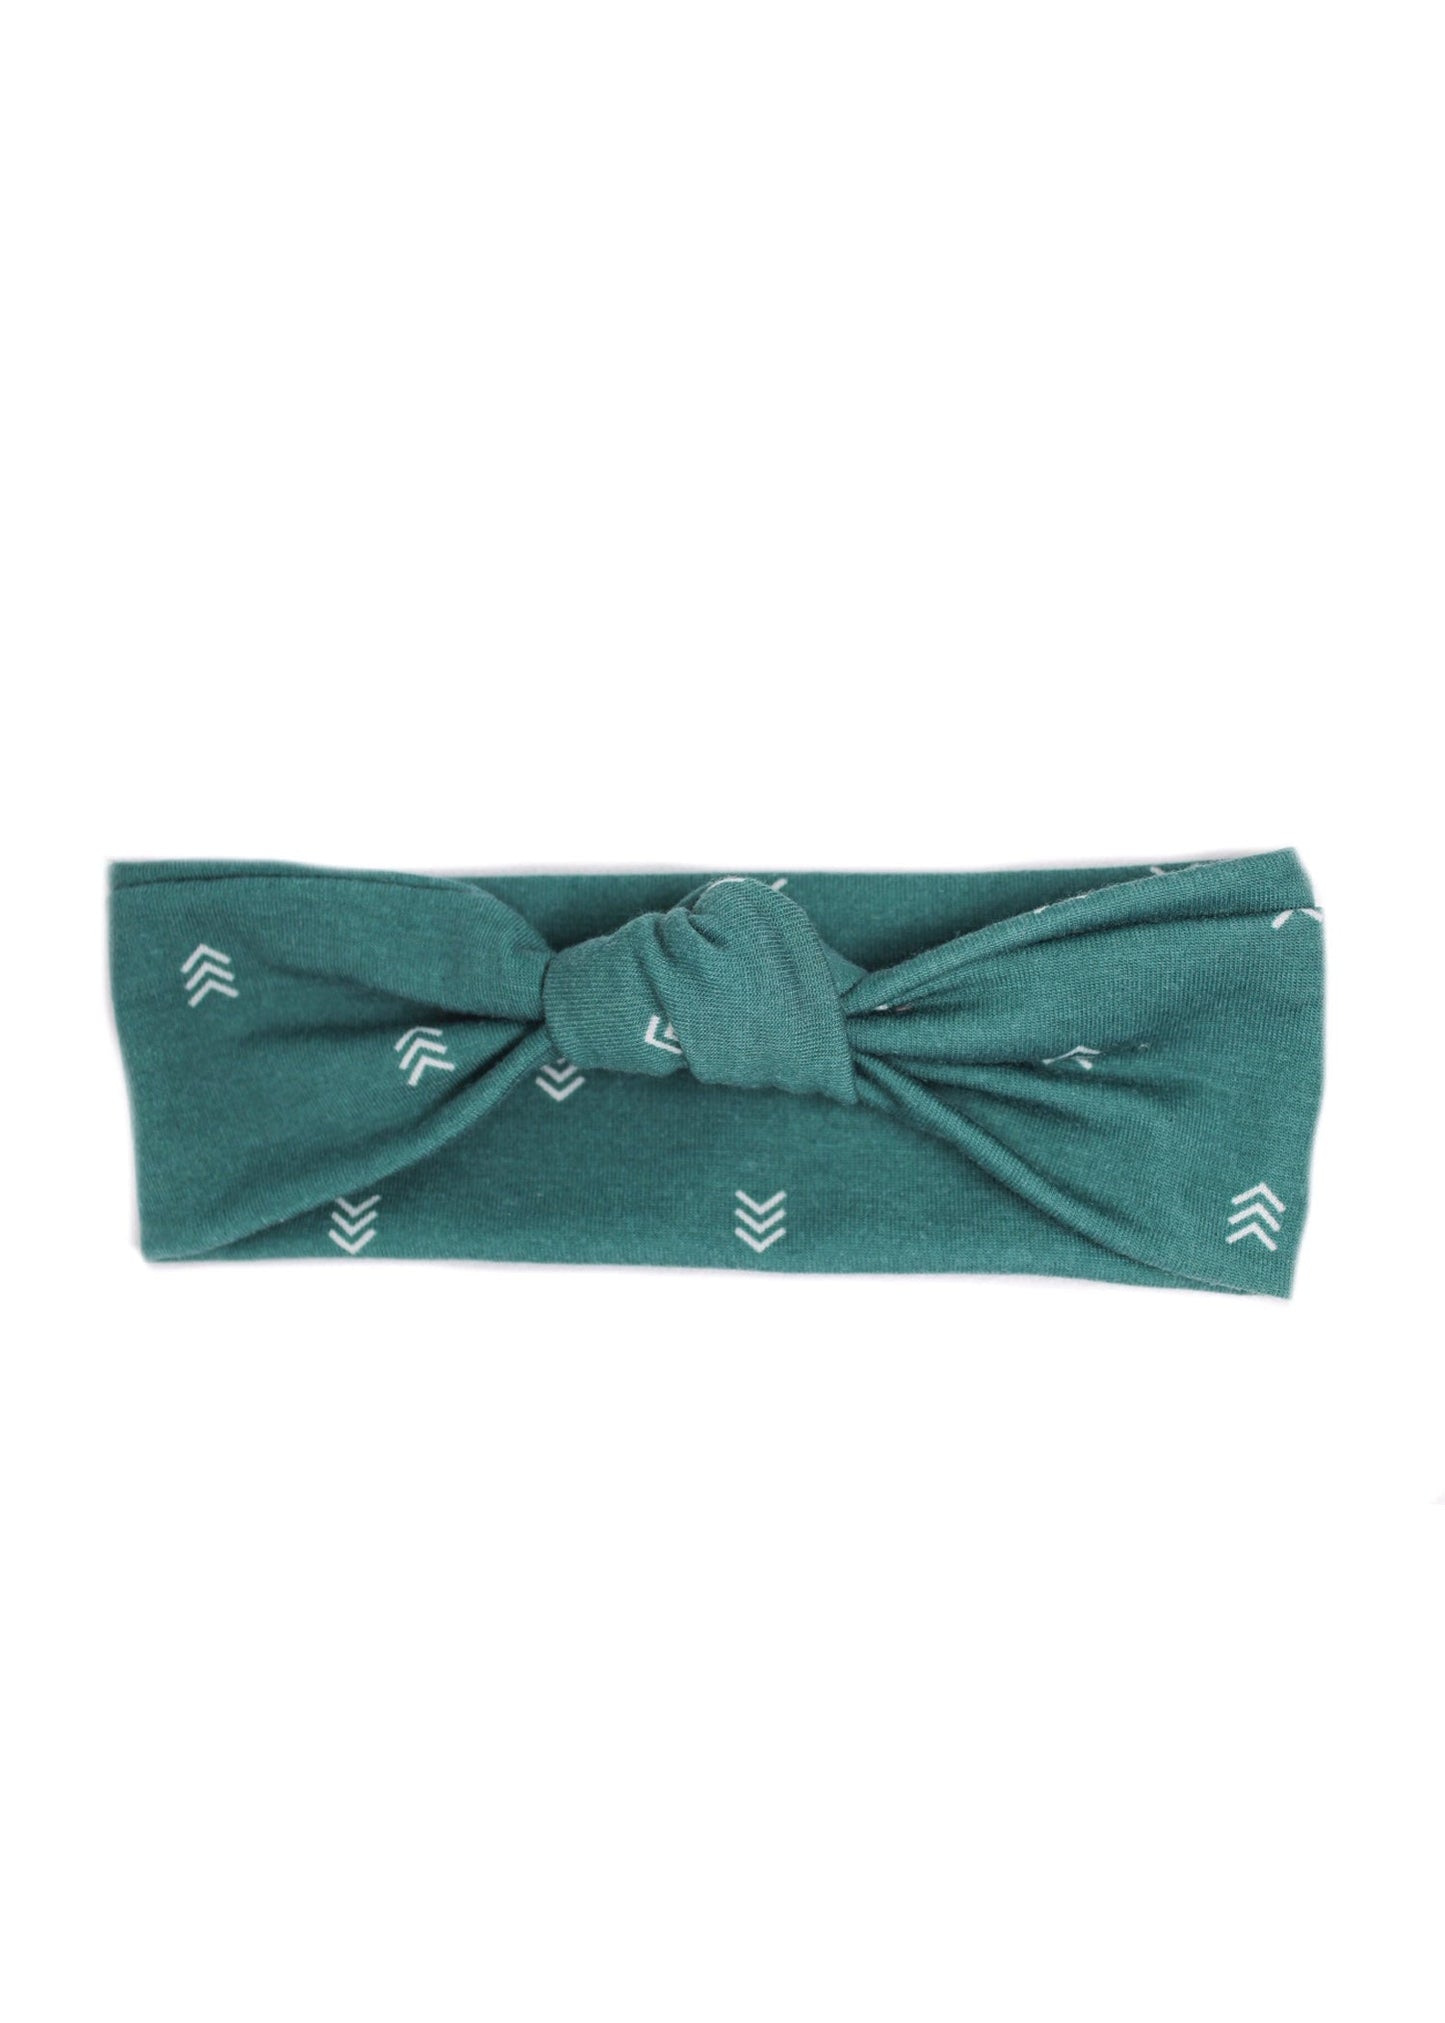 Turquoise Twist Youth Headband - FINAL SALE Accessories